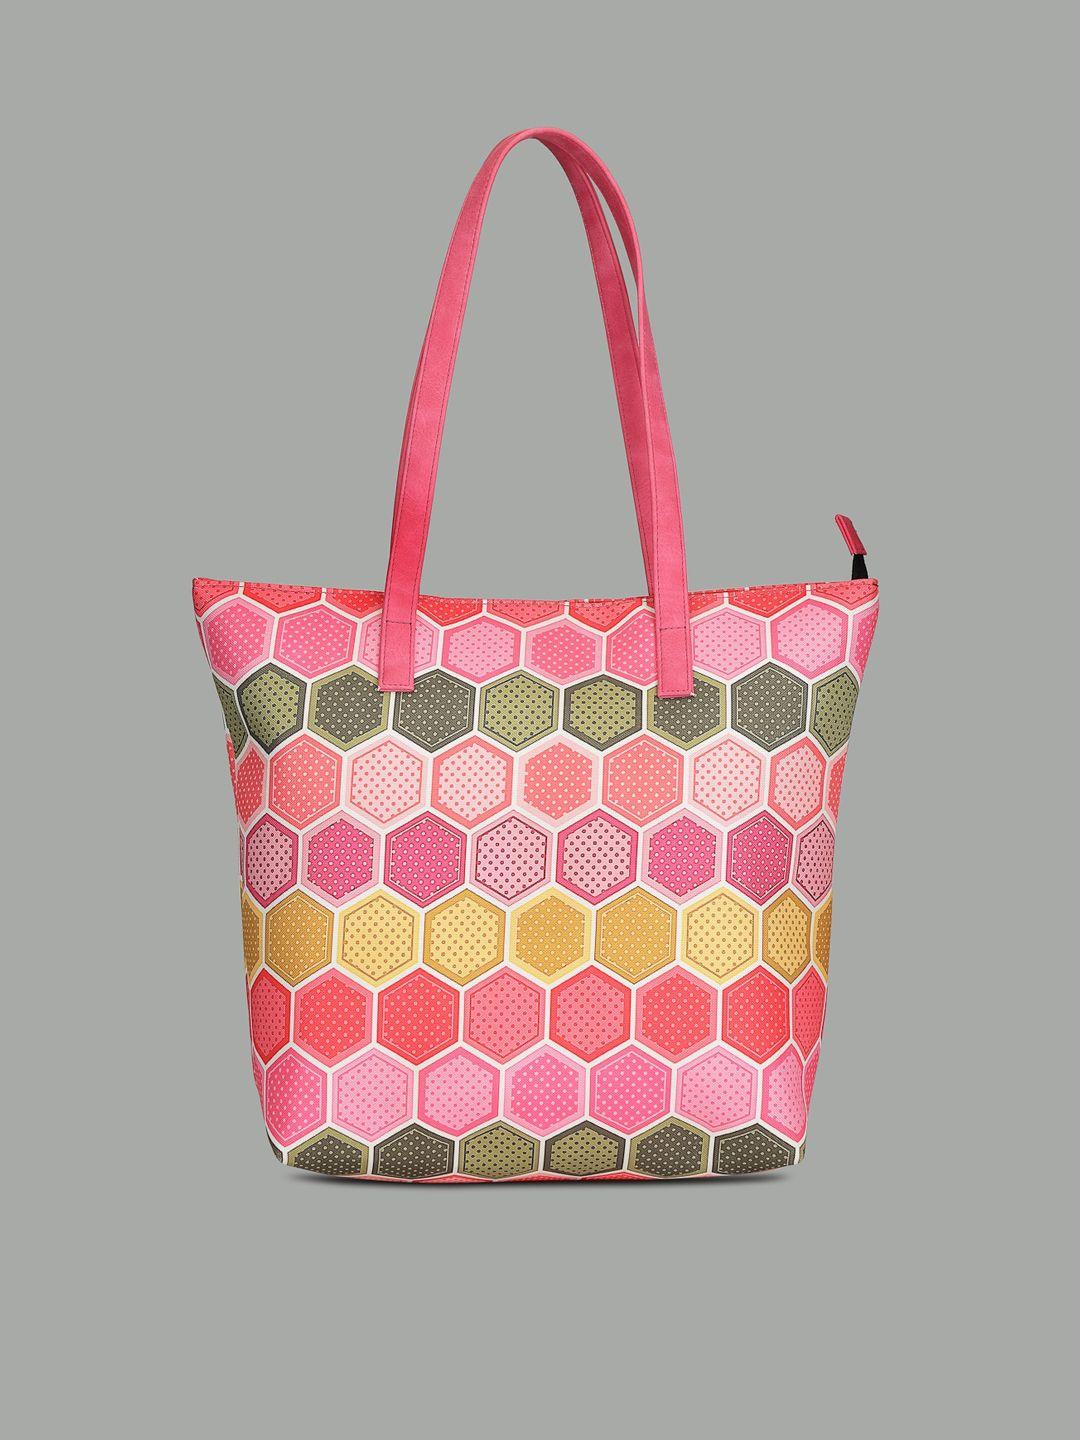 mast & harbour geometric printed structured tote bag